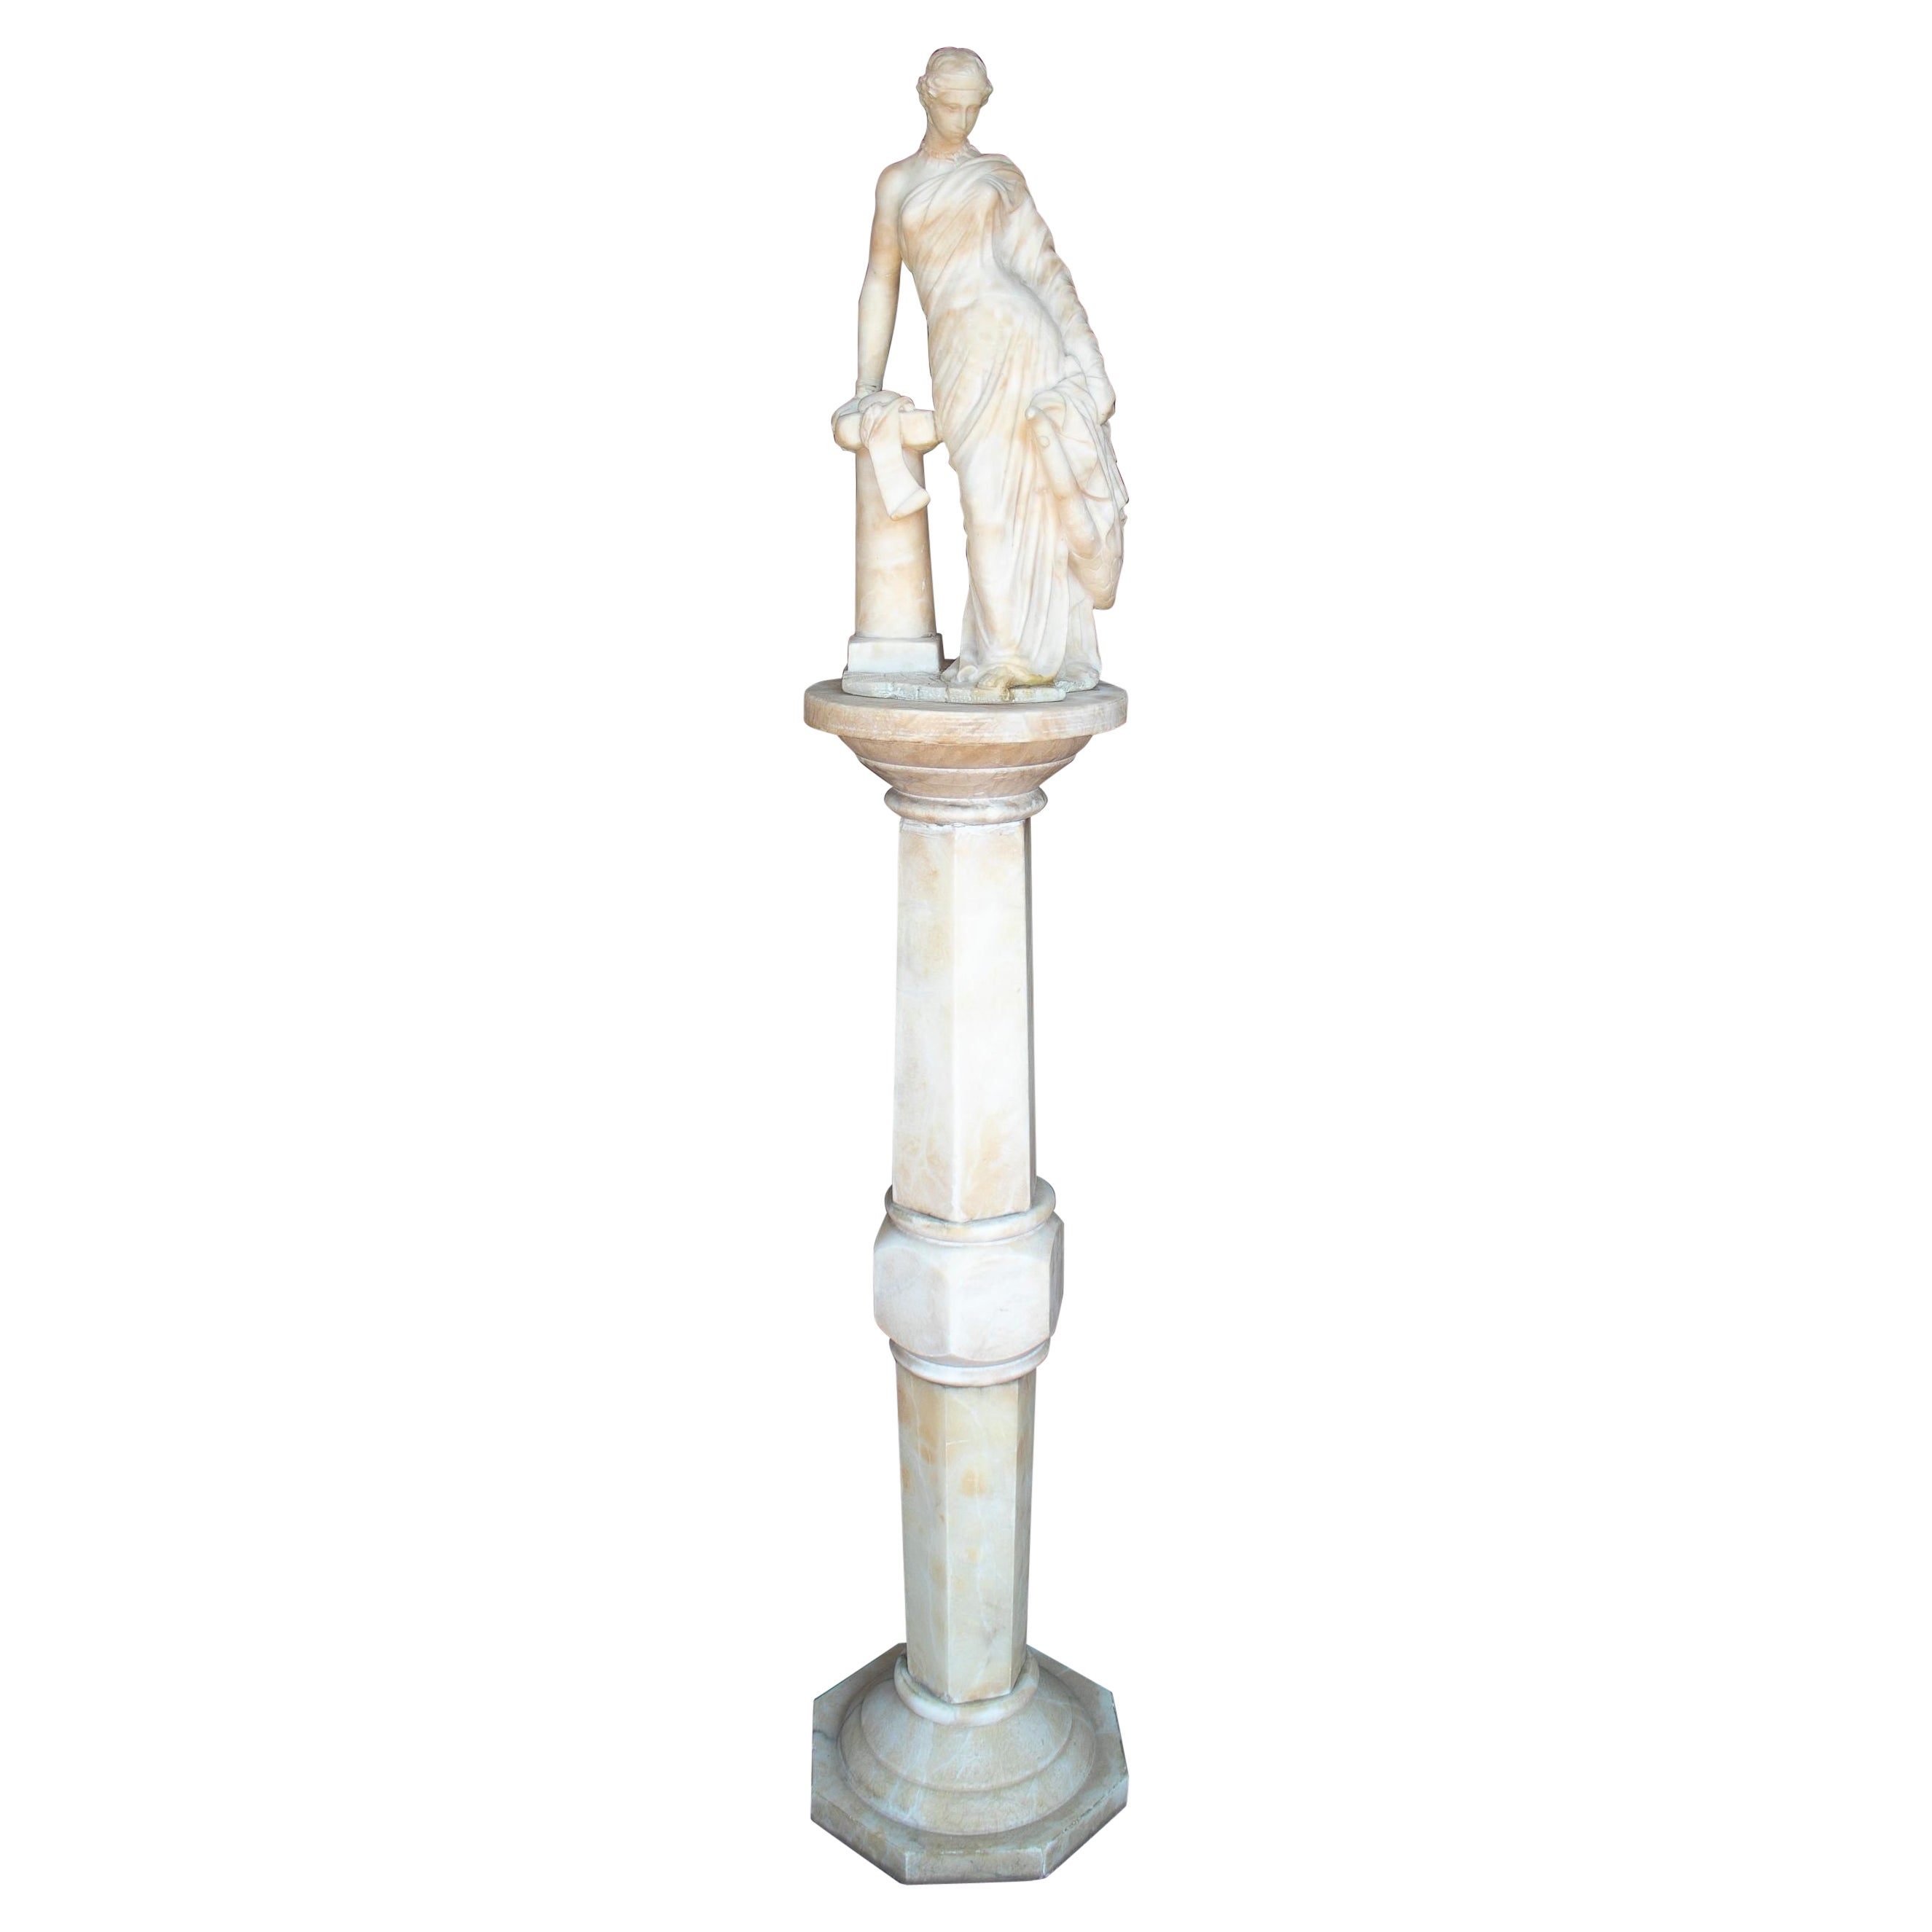 1980s French Romantic Woman Marble Sculpture w/ Pedestal Base For Sale